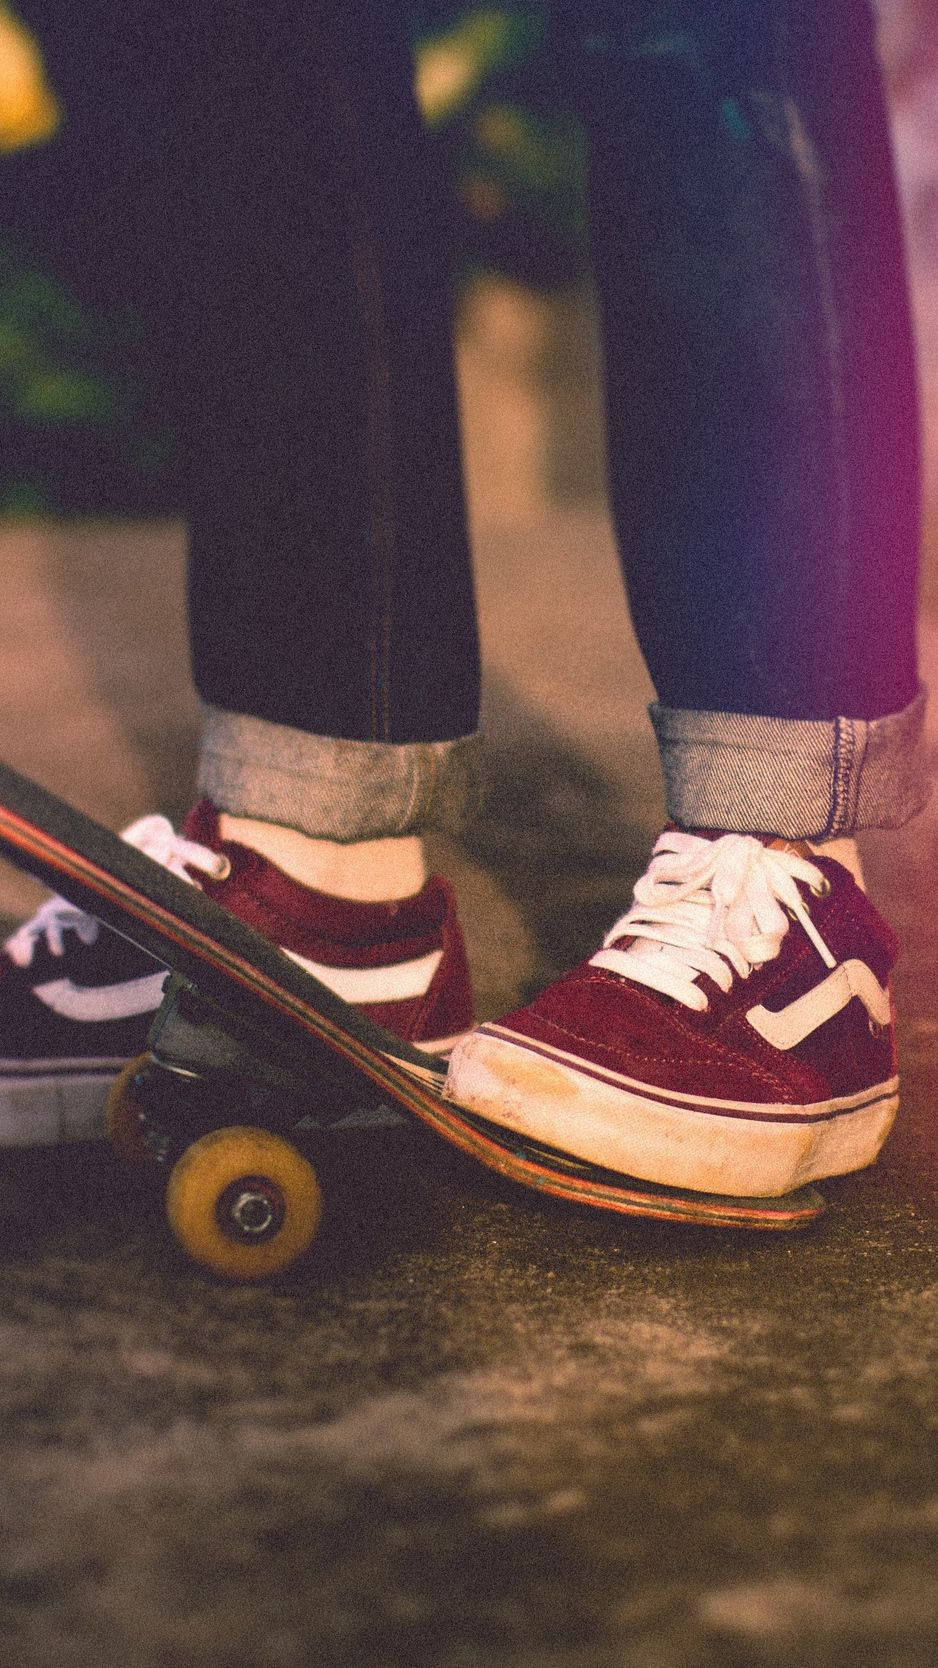 Maroon Vans Shoes With Skateboard iPhone Wallpaper